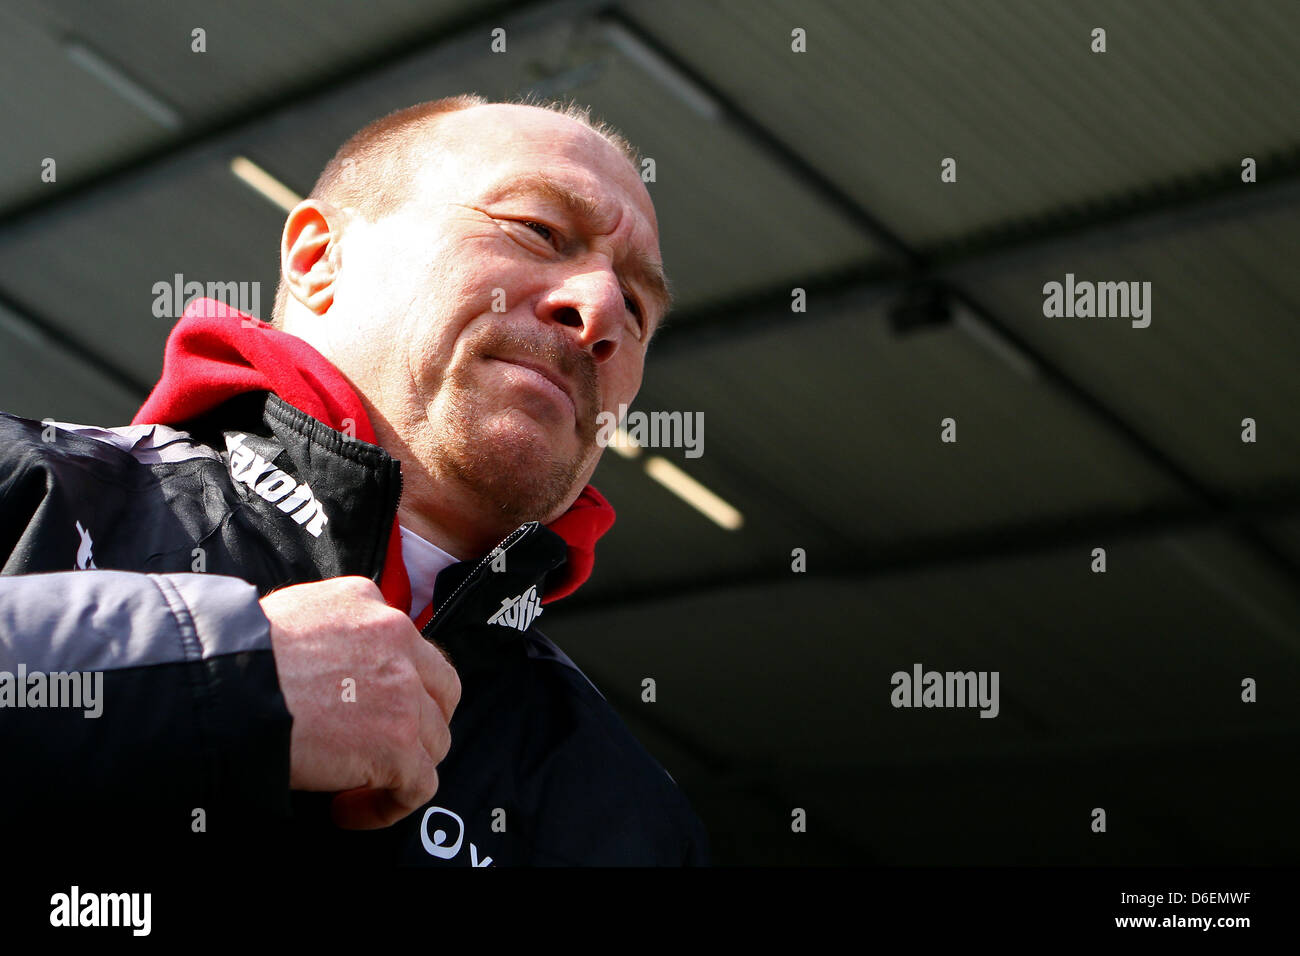 Rostock's head coach Wolfgang Wolf gives an interview prior to the German Bundesliga second devision match between VfL Bochum and Hansa Rostock at rewirpowerStadion in Bochum, Germany, 05 February 2012. Photo: Kevin Kurek Stock Photo